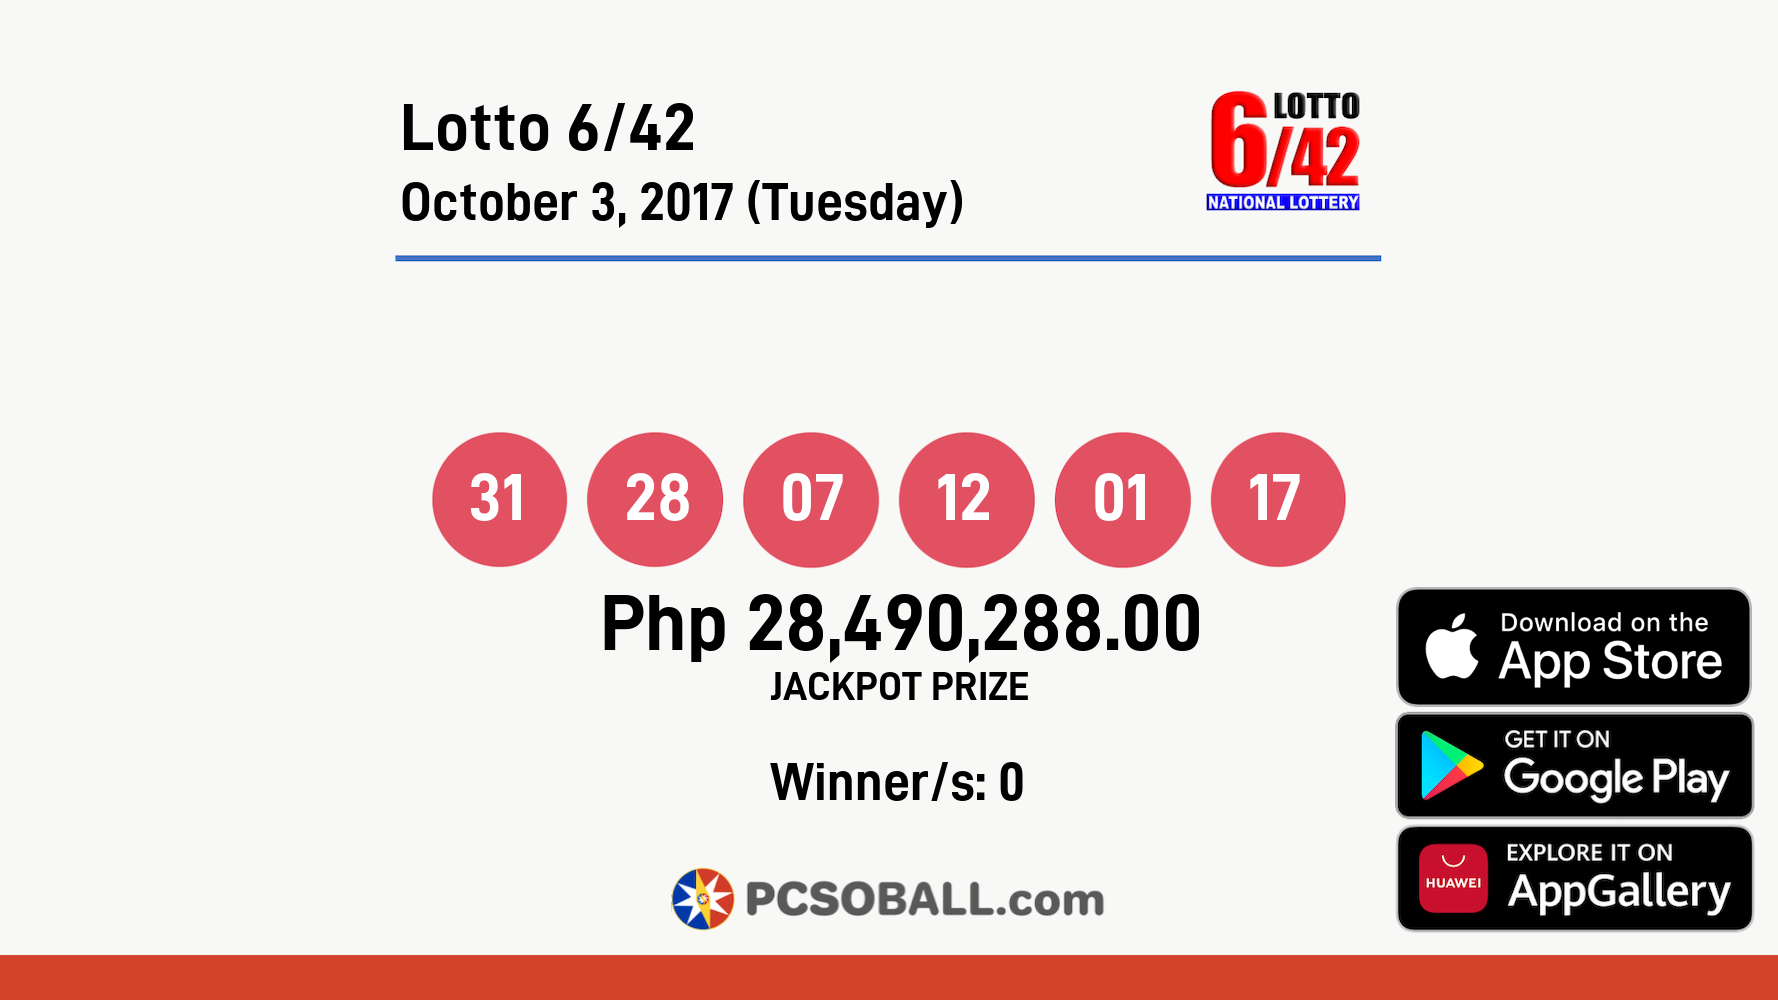 Lotto 6/42 October 3, 2017 (Tuesday) Result